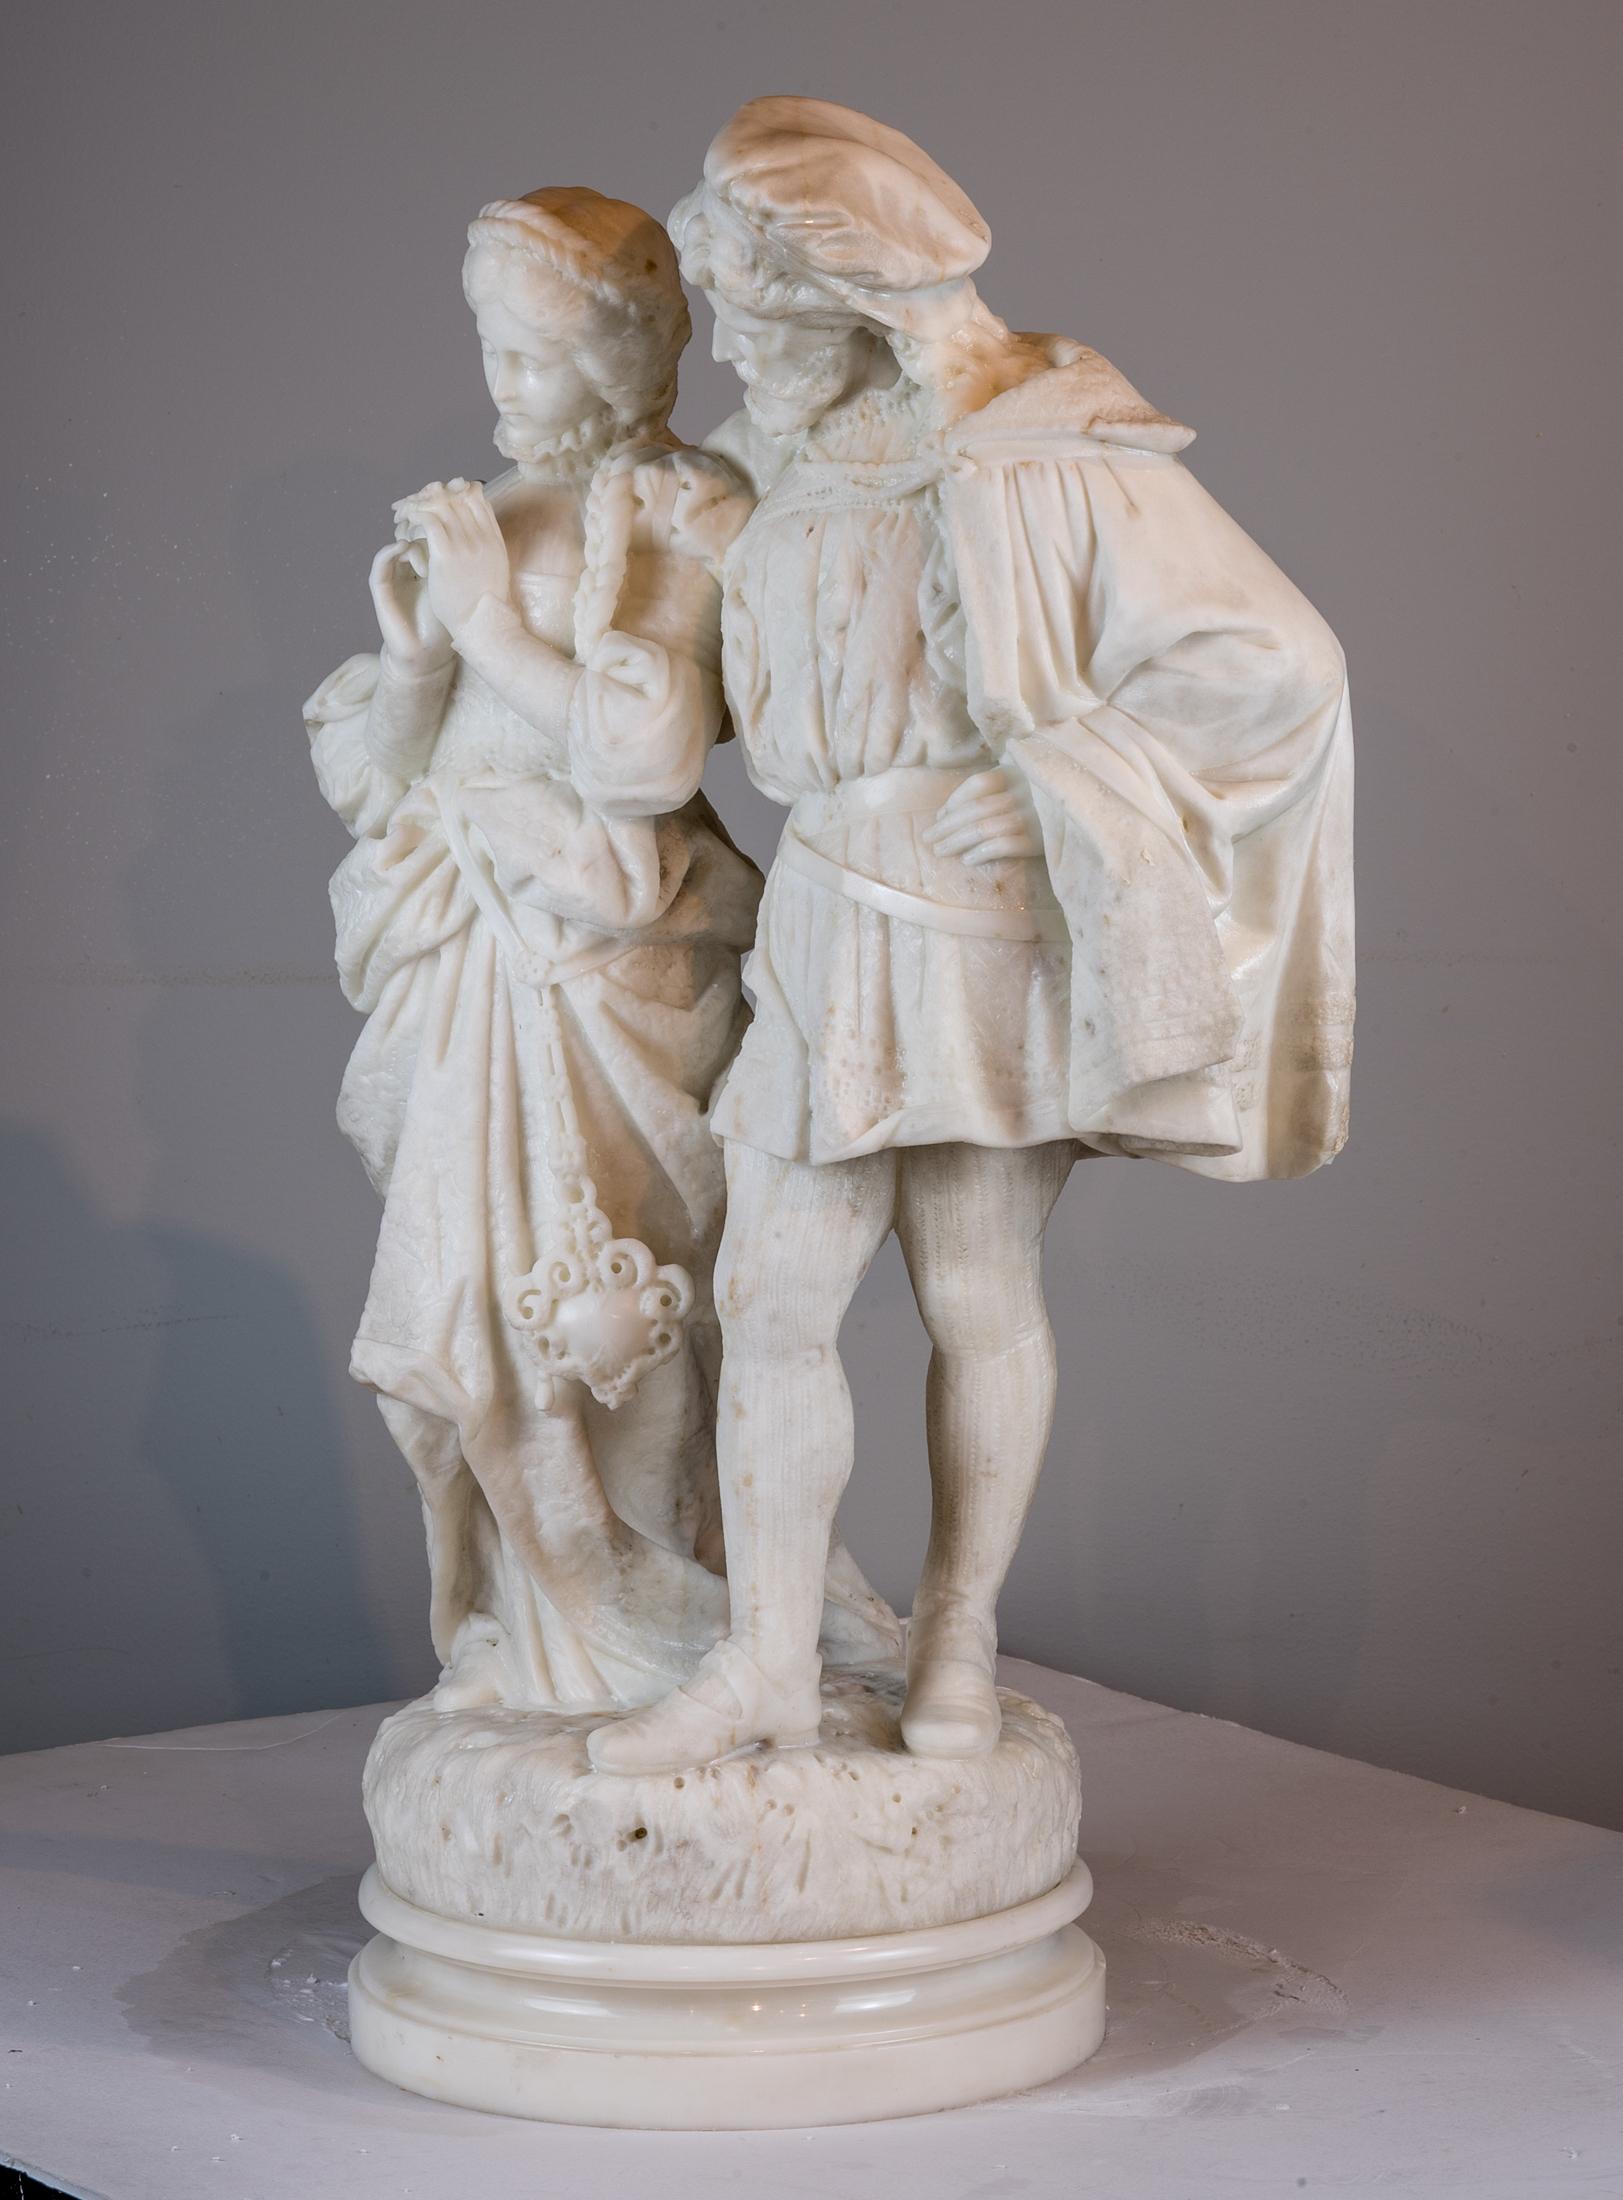 A fine quality Carrara marble sculpture of lovers. The young maiden holding a daisy while the gentleman embraces her pationately.

Artist: Attributed to Pasquale Romanelli (1812-1887)
Origin: Italian
Date: 19th century
Size: 28 in. x 17 in.